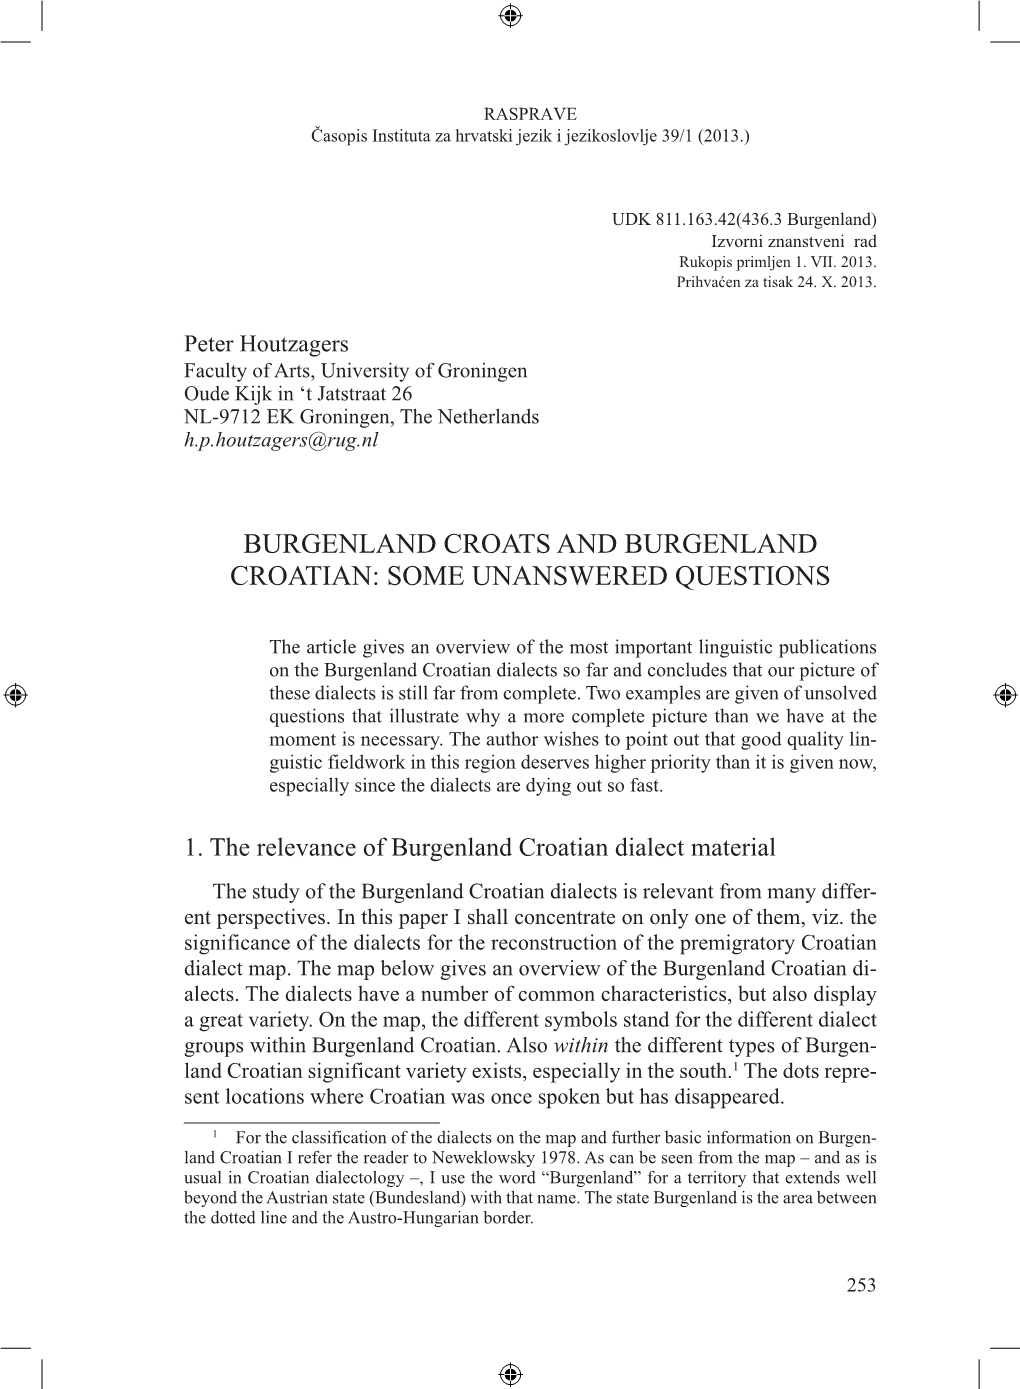 Burgenland Croats and Burgenland Croatian: Some Unanswered Questions